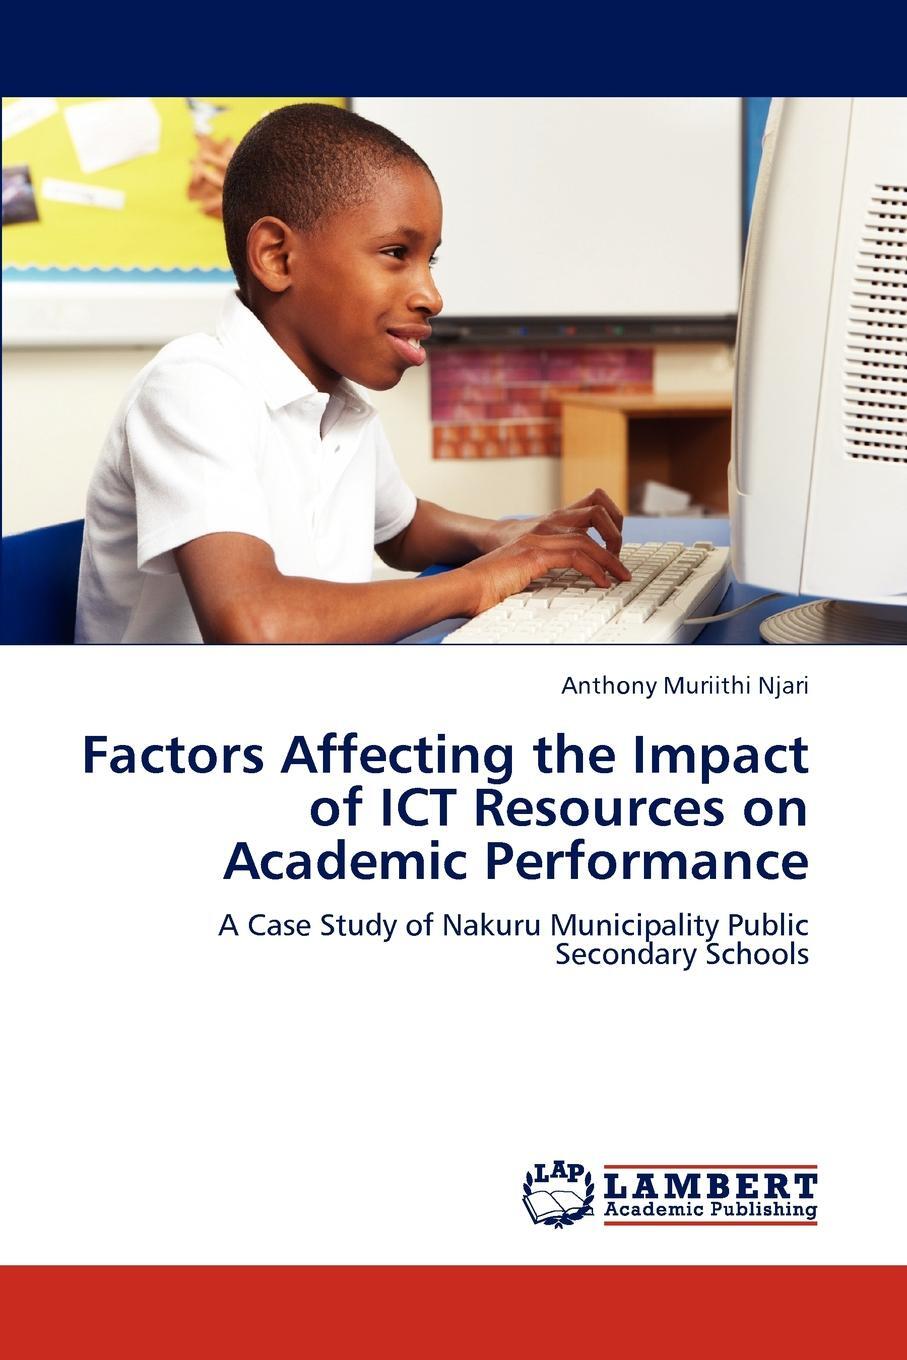 Academic performance. Impact of ICT on Education. Stress and the role in Education. The study of Education. Education and field of study.